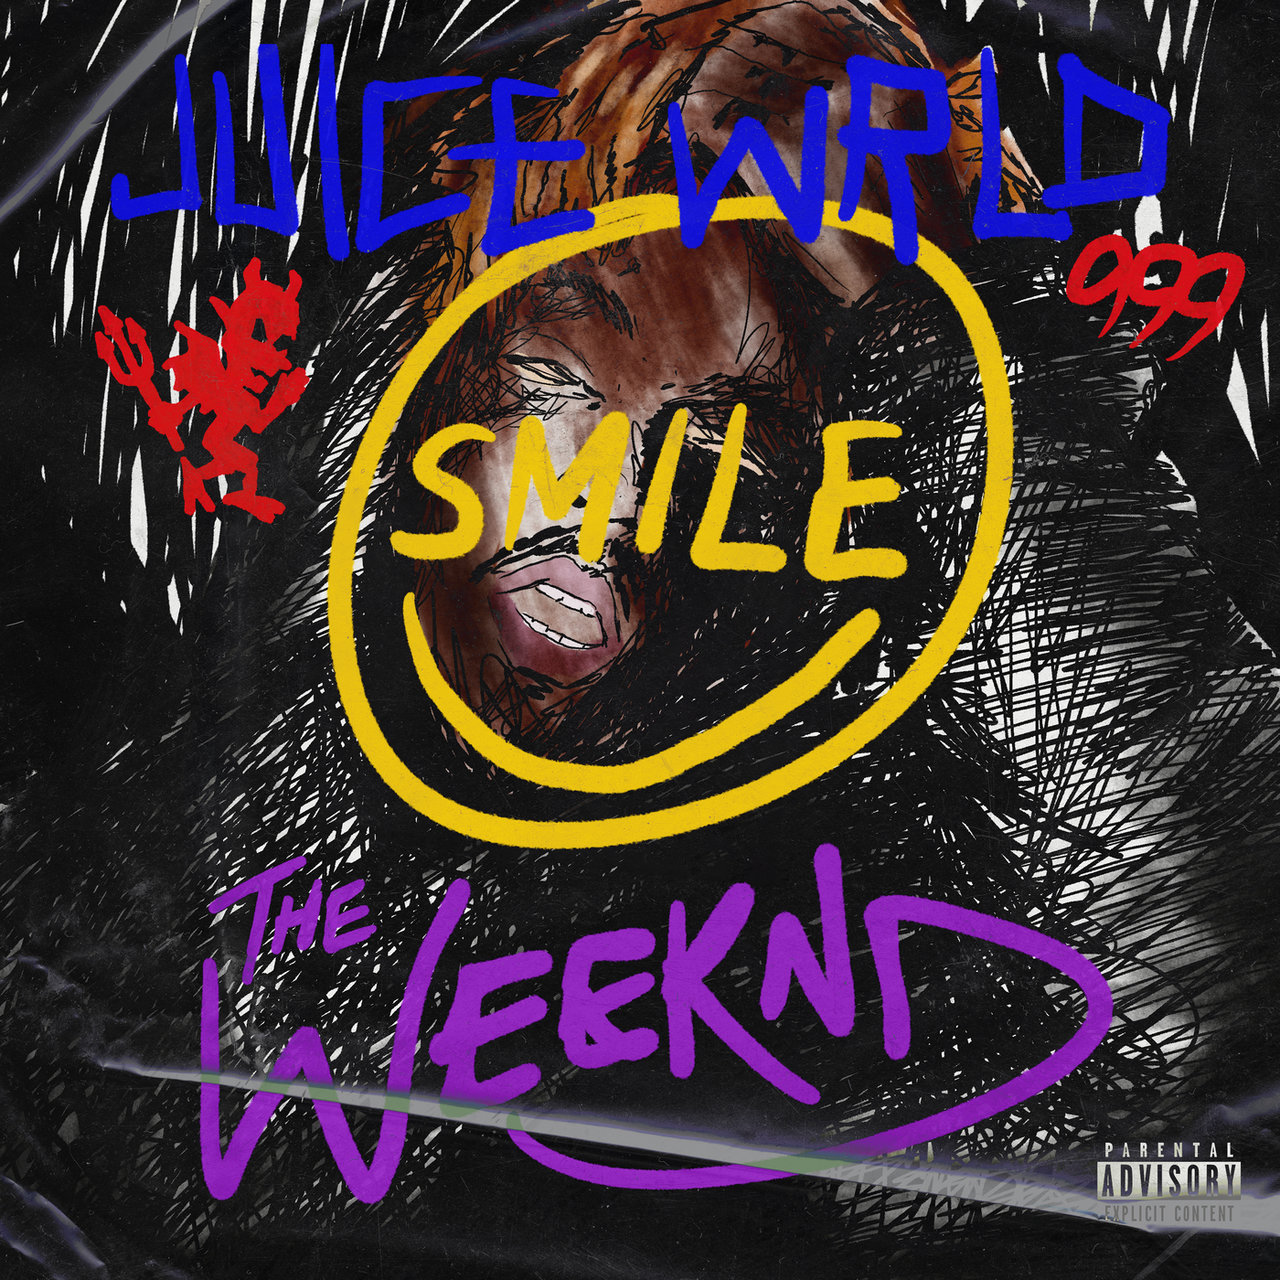 Juice Wrld - Smile (ft. The Weeknd) (Cover)